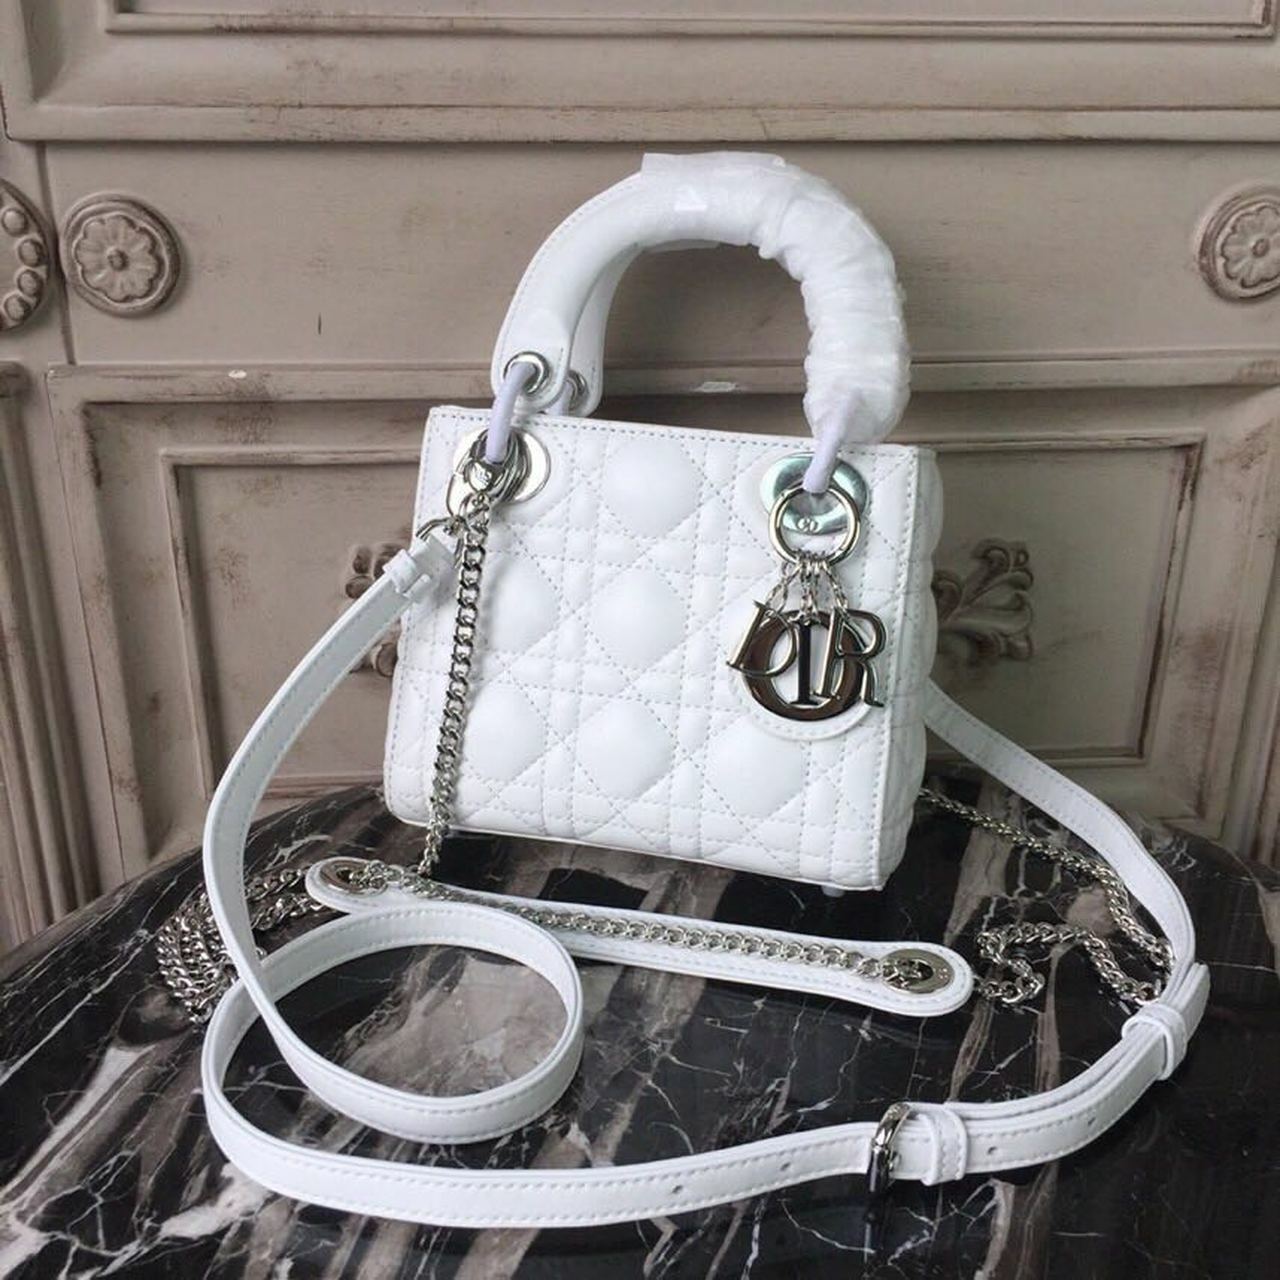 Christian Dior Mini Lady Dior Bag 18cm With Chain Silver Hardware Lambskin Leather Spring/Summer 2019 Collection, White - Ganebet Store